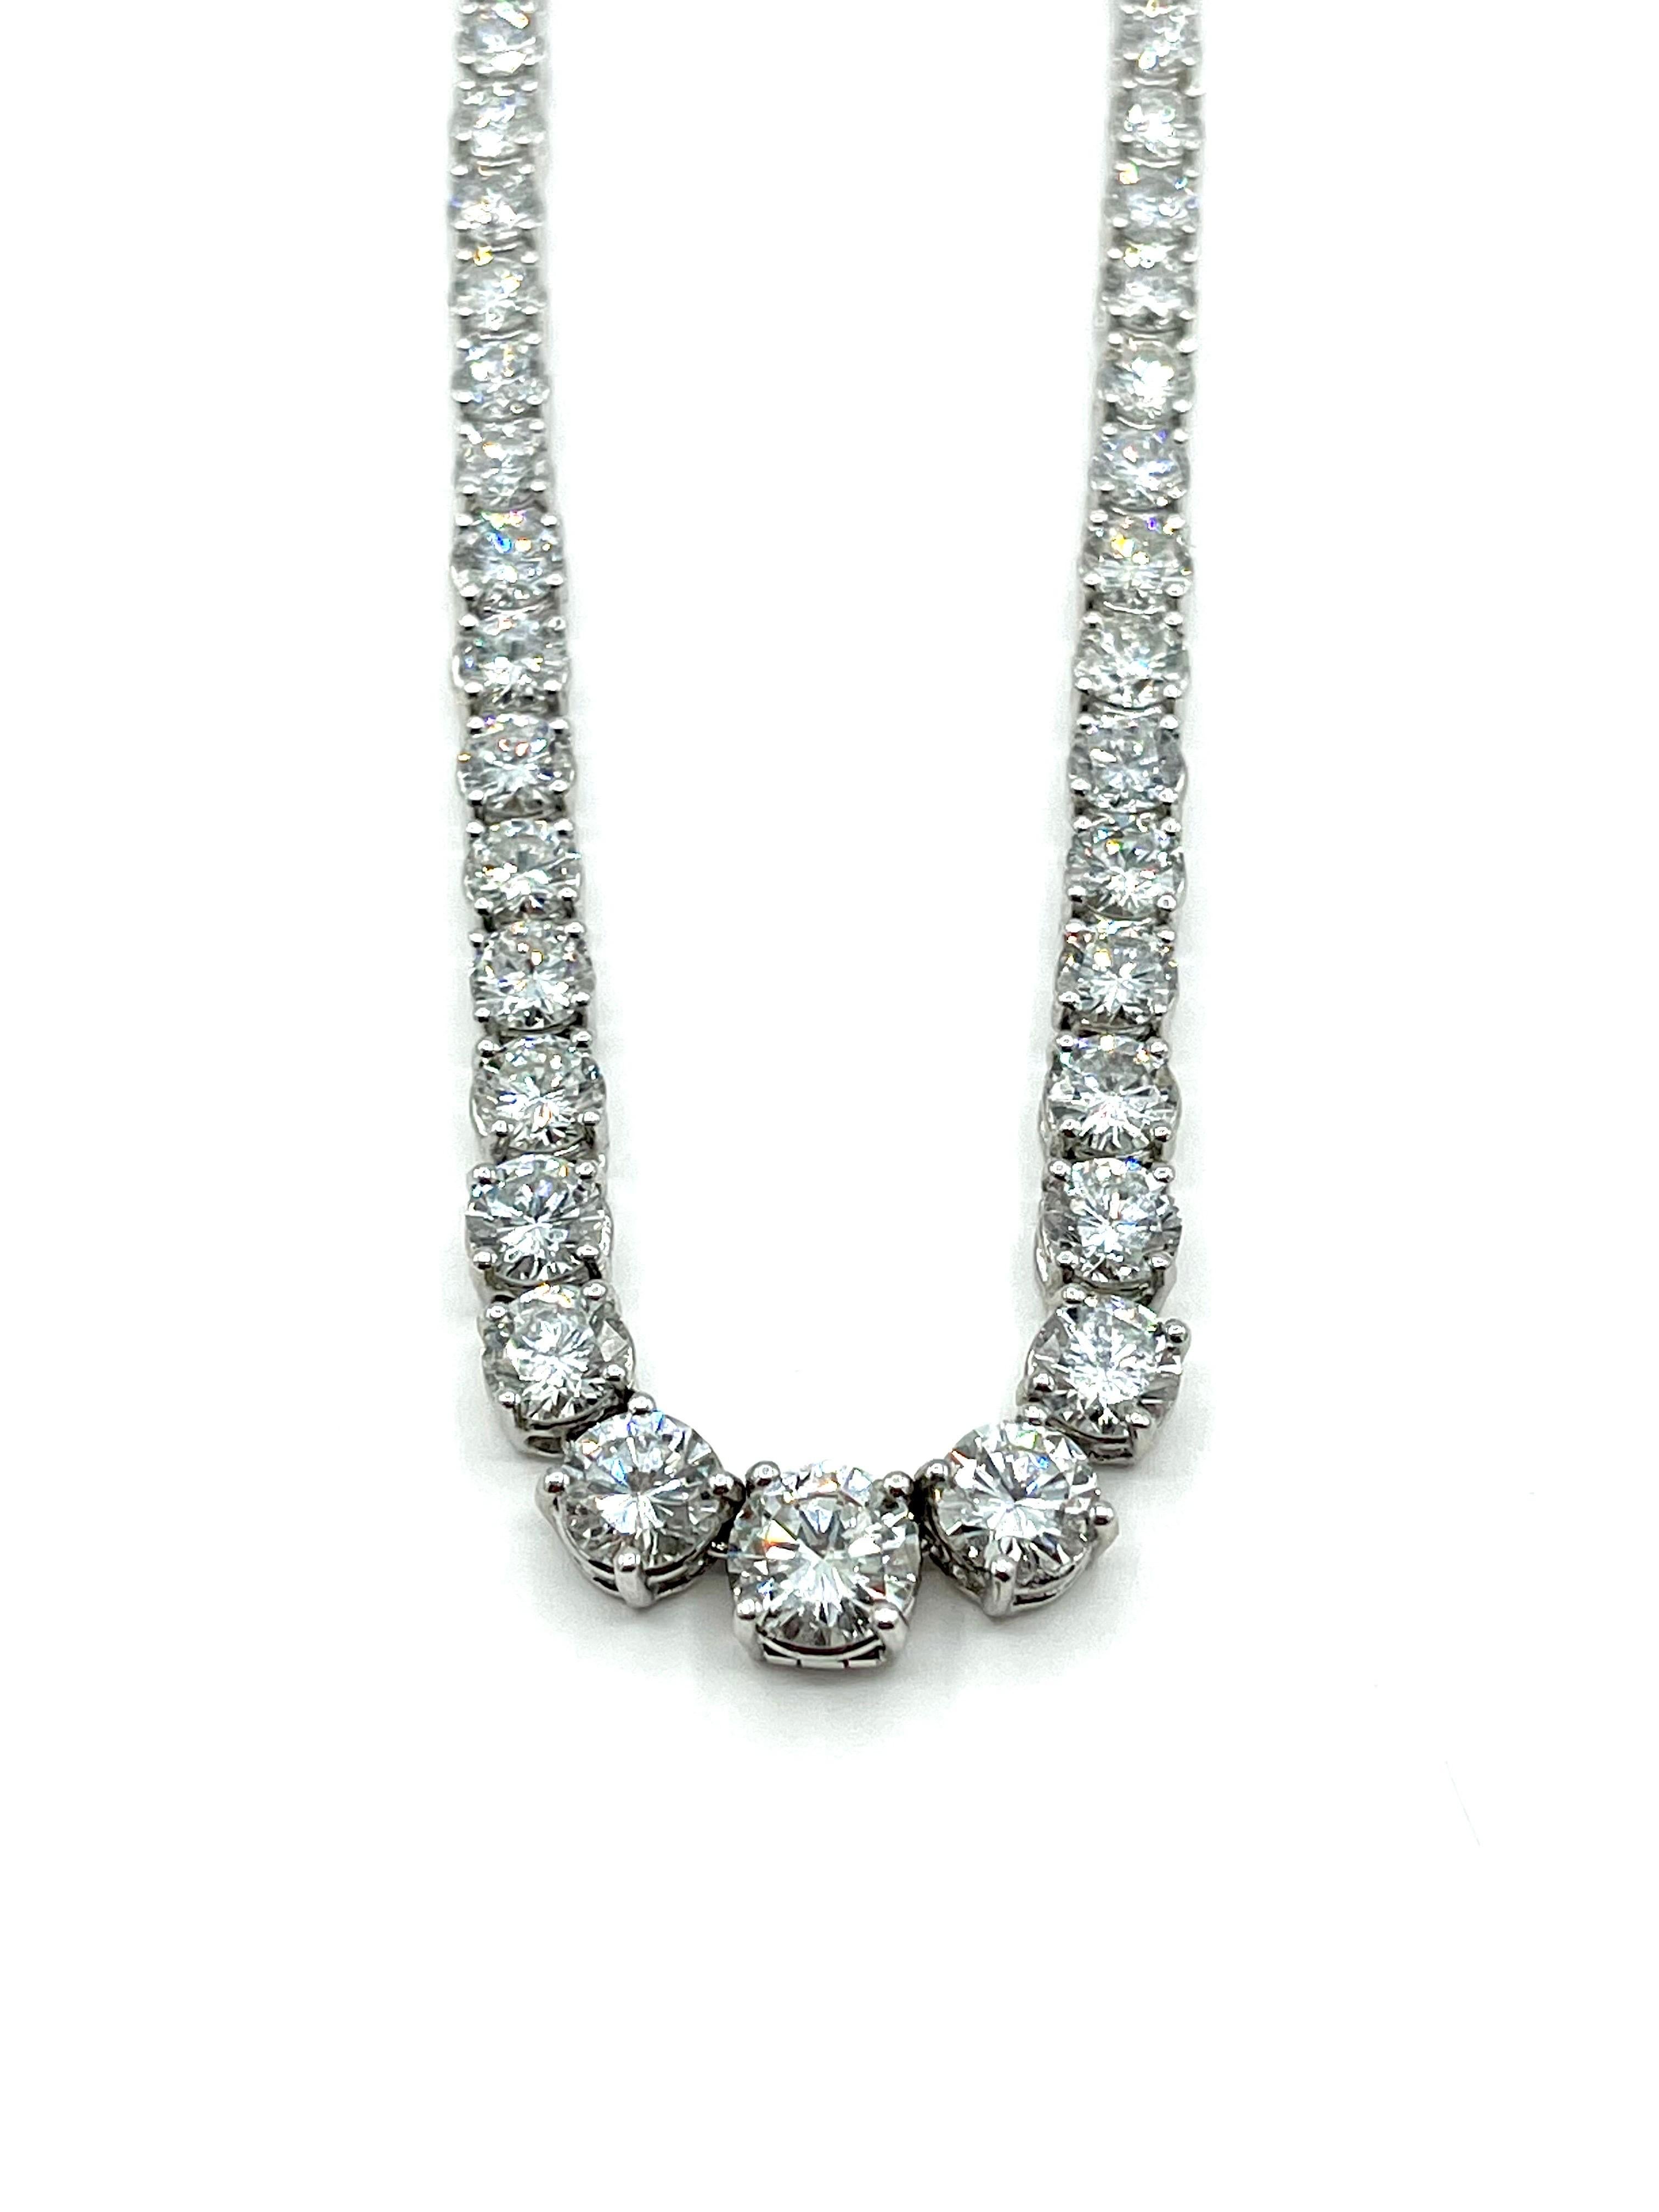 This necklace is amazing!  There is a total of 20.41 carats in round brilliant Diamonds, attached with a bow style clasp containing 0.65 carats in baguettes and marquise shaped Diamonds.  The Diamonds graduate from the back to the center of the